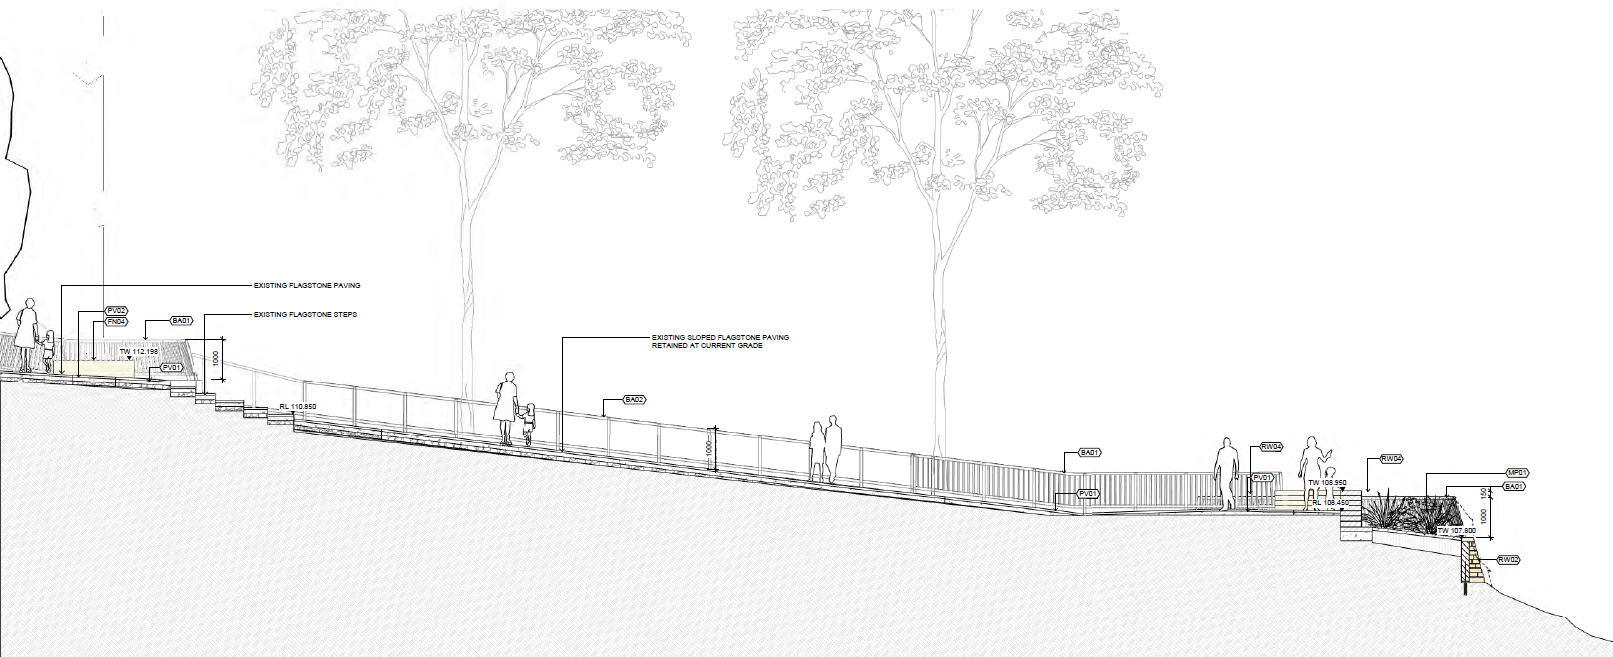 Finalised design for the ramp section, showing the rotunda at left and eastern lookout at right